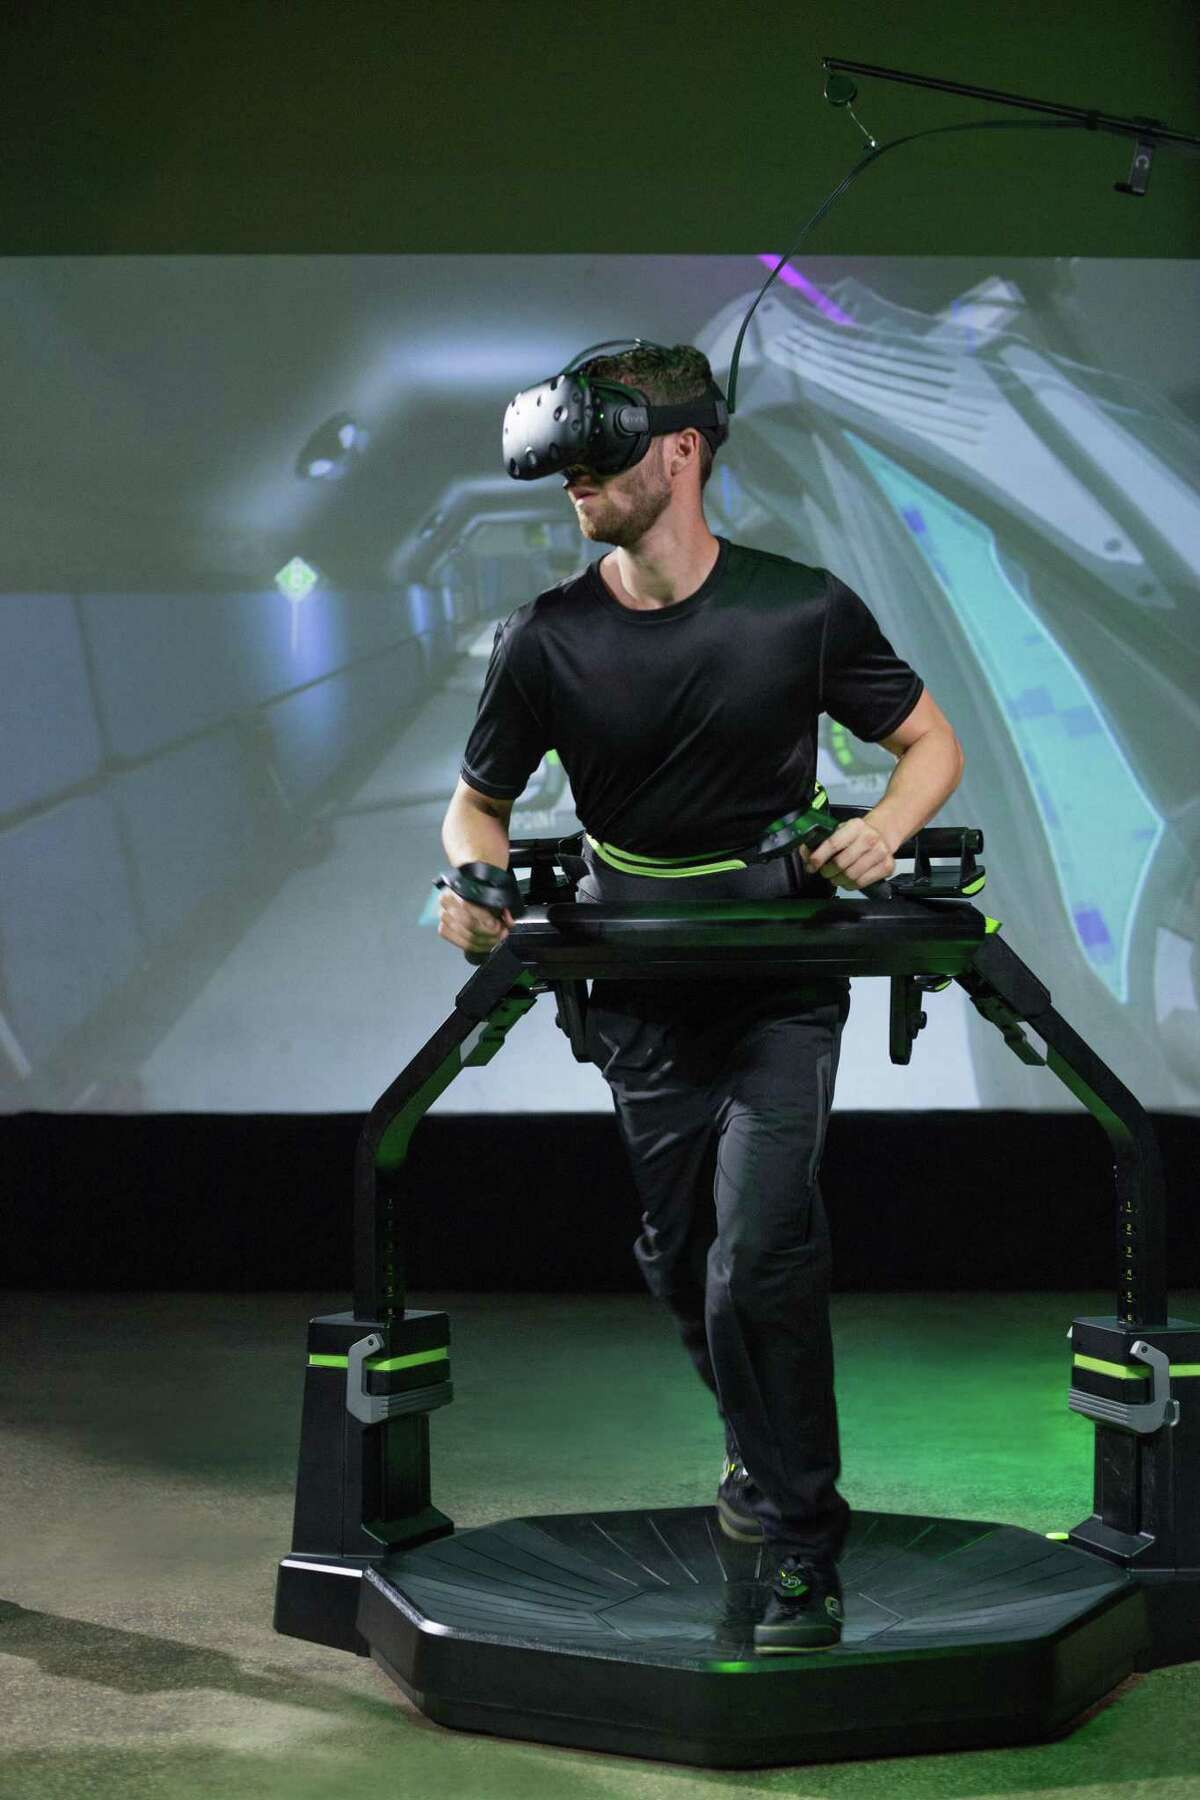 The Virtuix Omni is a treadmill-like platform that straps players inside a plastic ring positioned at waist level, allowing them to walk in any direction without risk of falling or colliding with other people. Walking or running on this device propels characters in virtual games.